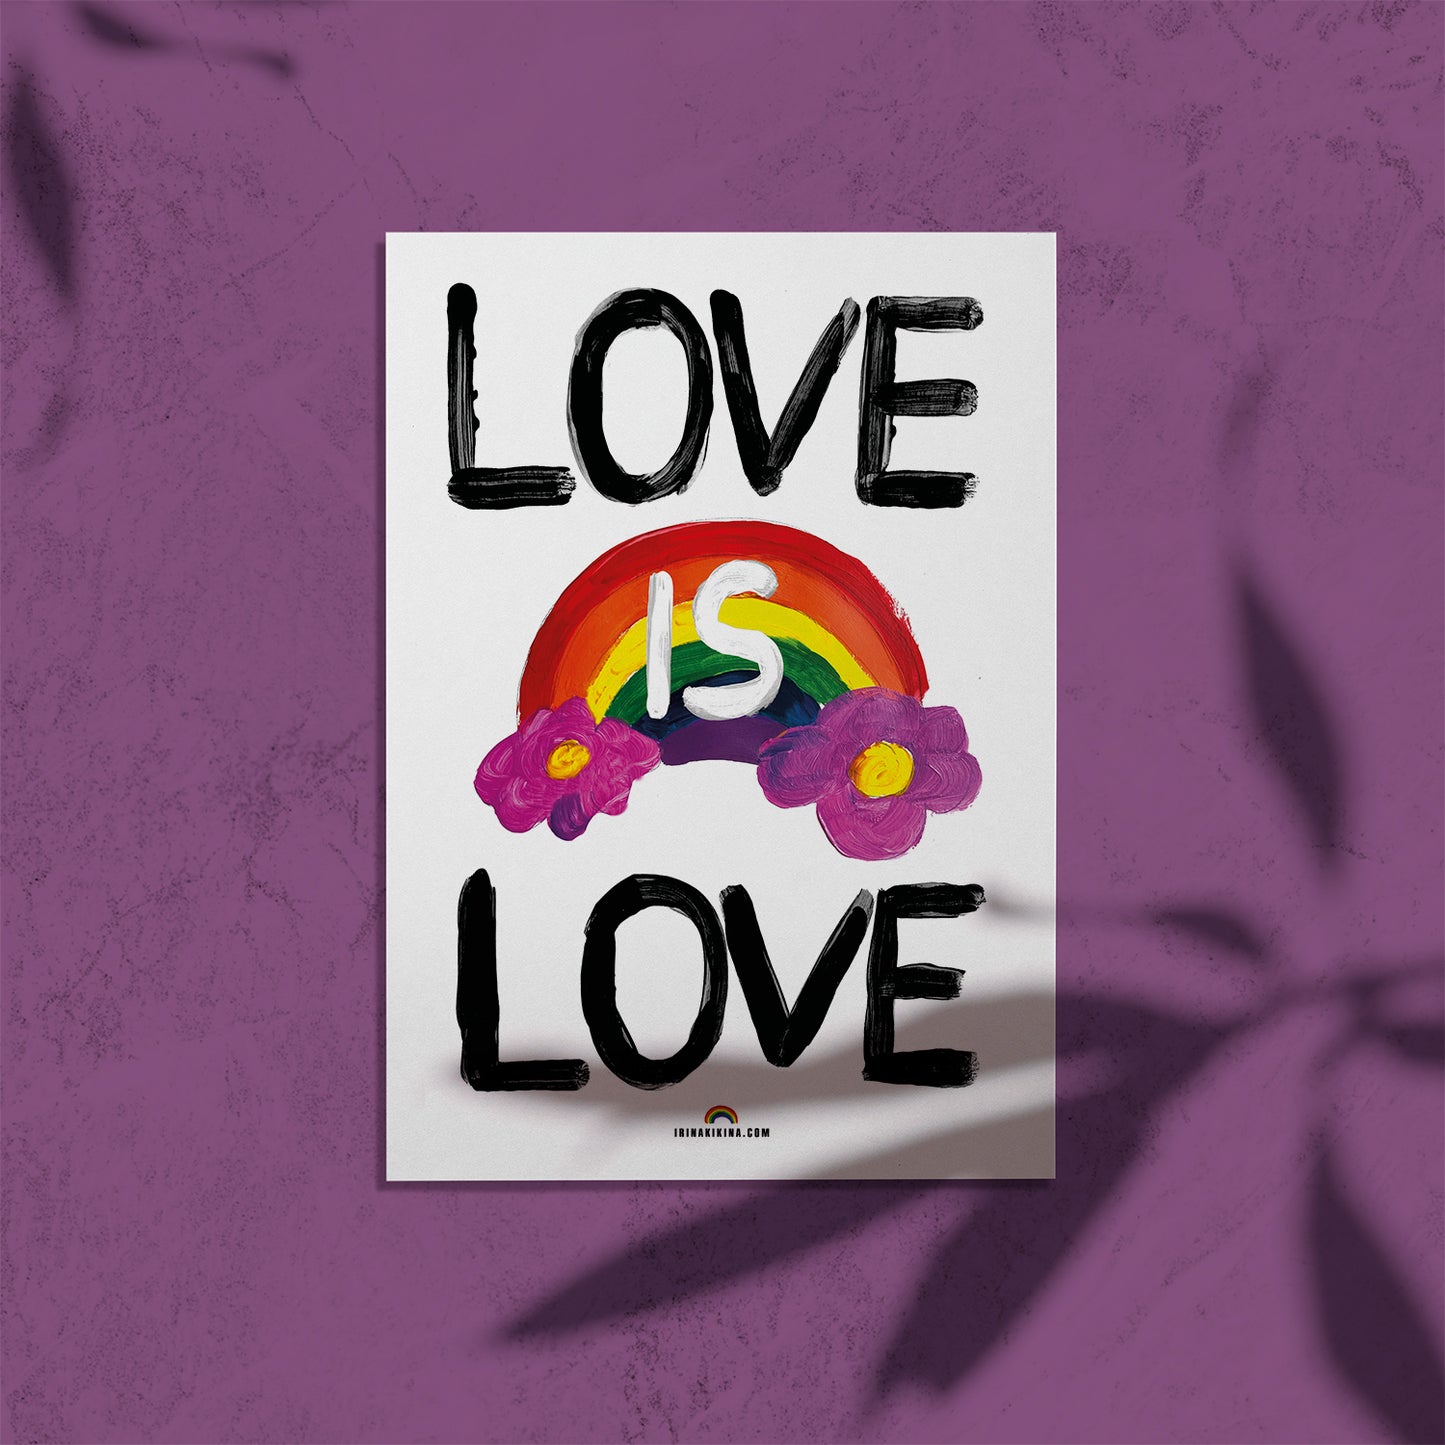 Love is Love Painted Artwork A4 Poster.